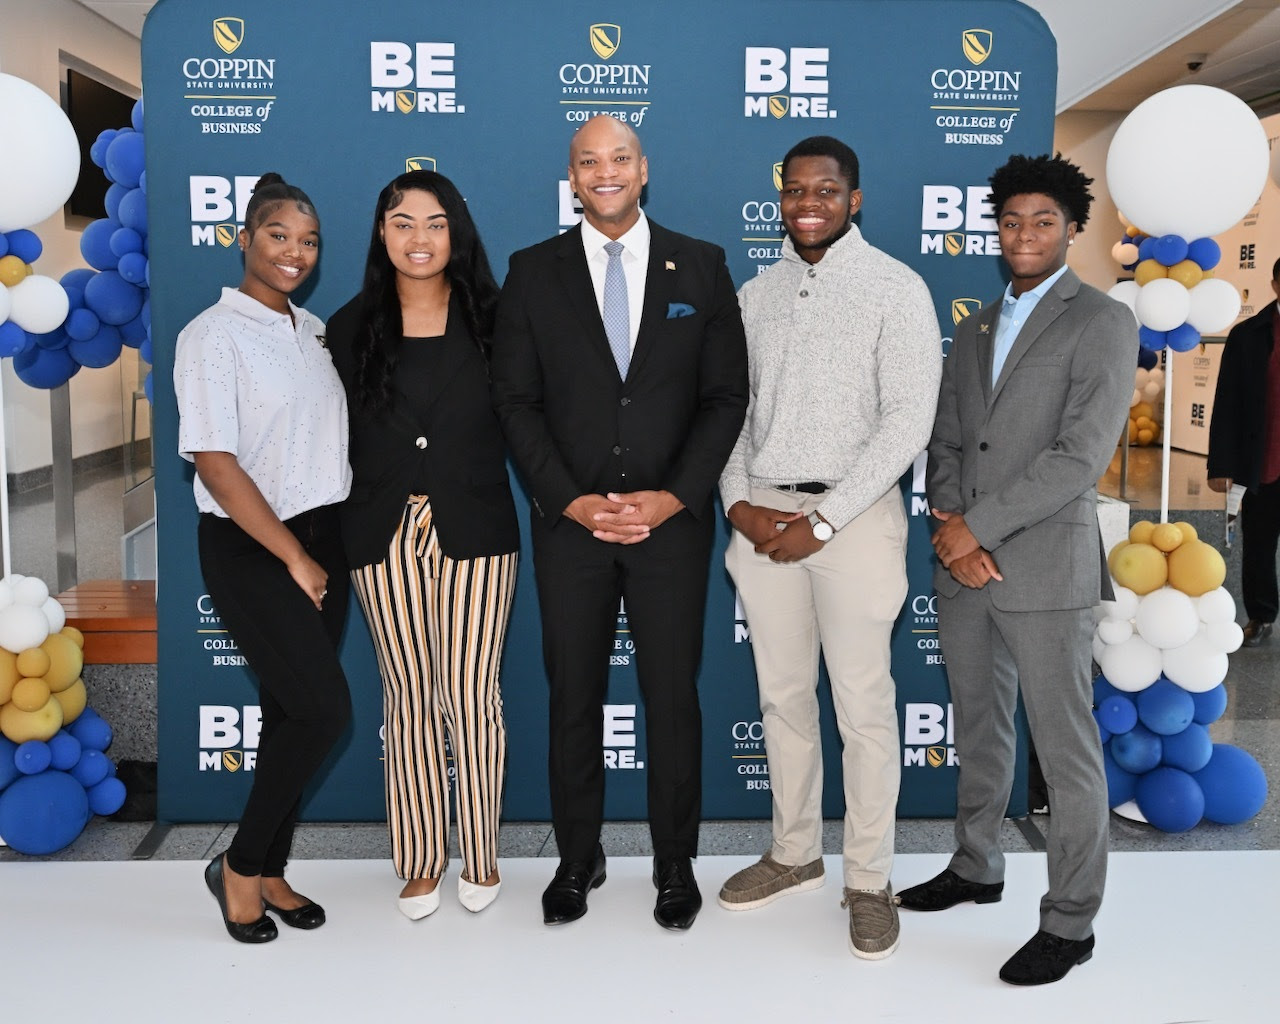 Governor Moore with students at Coppin State University